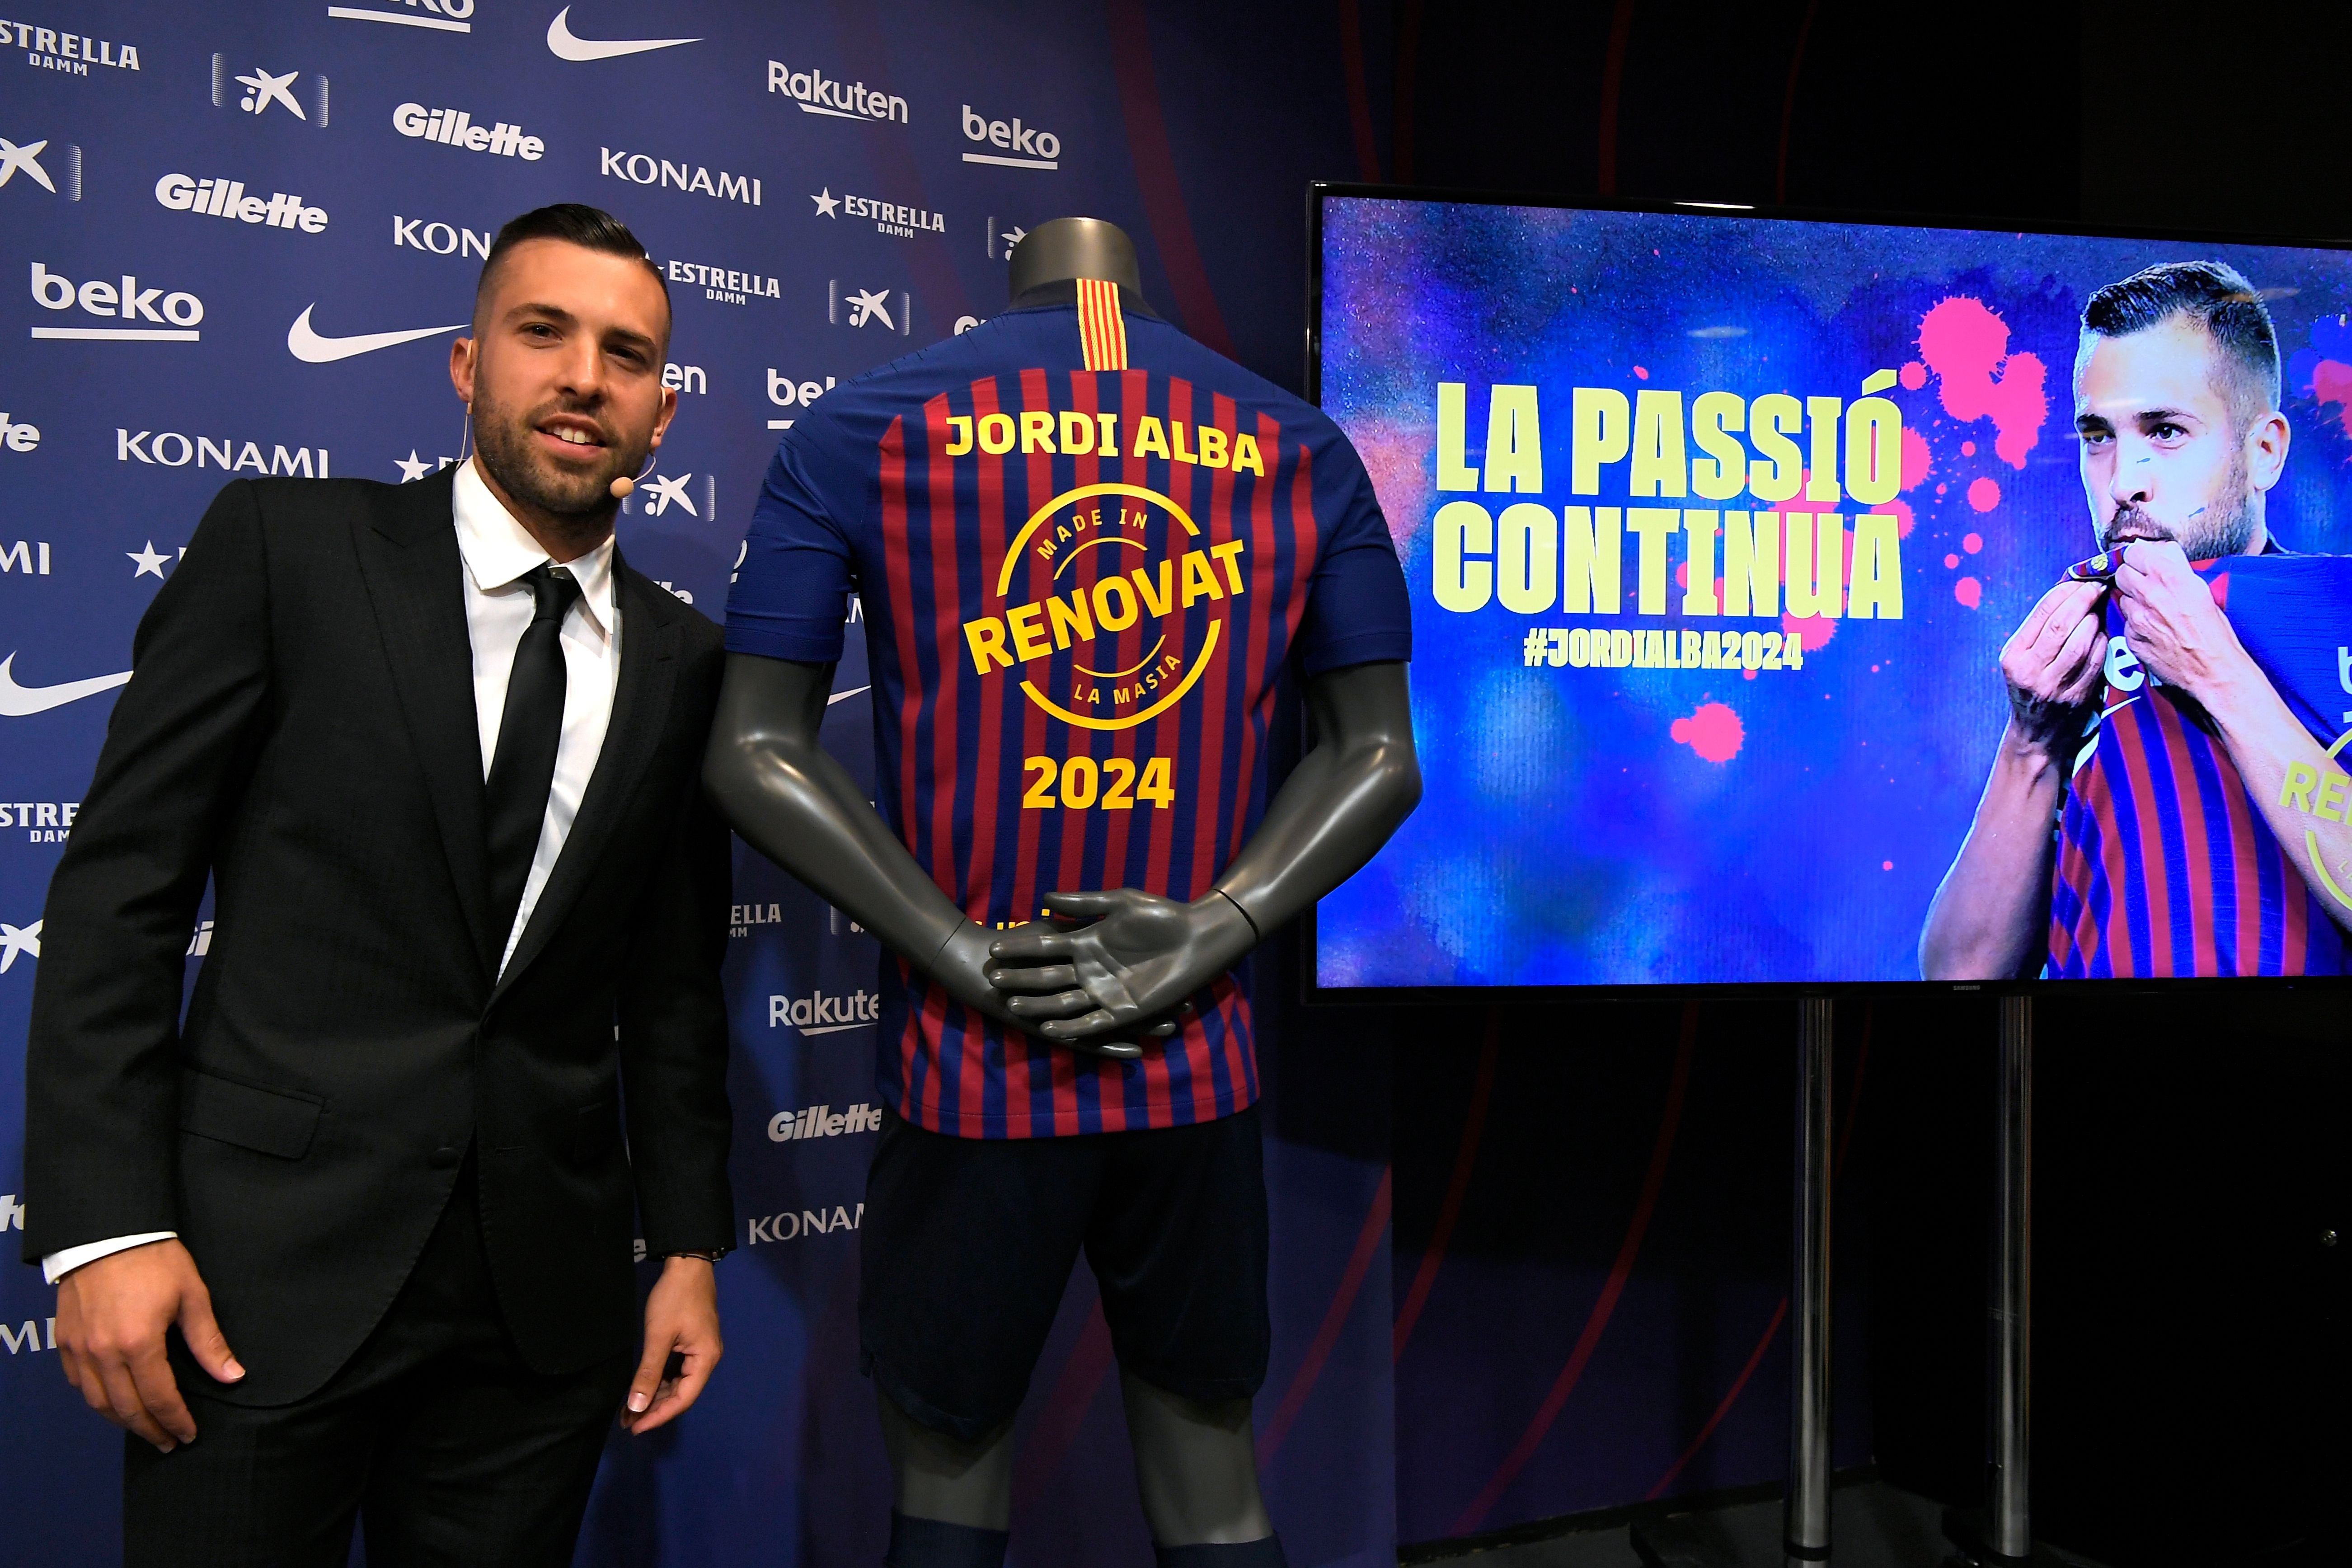 FC Barcelona's Spanish defender Jordi Alba poses during a press conference to officially announce his contract renewal at the Camp Nou stadium in Barcelona on March 11, 2019 (Photo by LLUIS GENE / AFP)        (Photo credit should read LLUIS GENE/AFP/Getty Images)